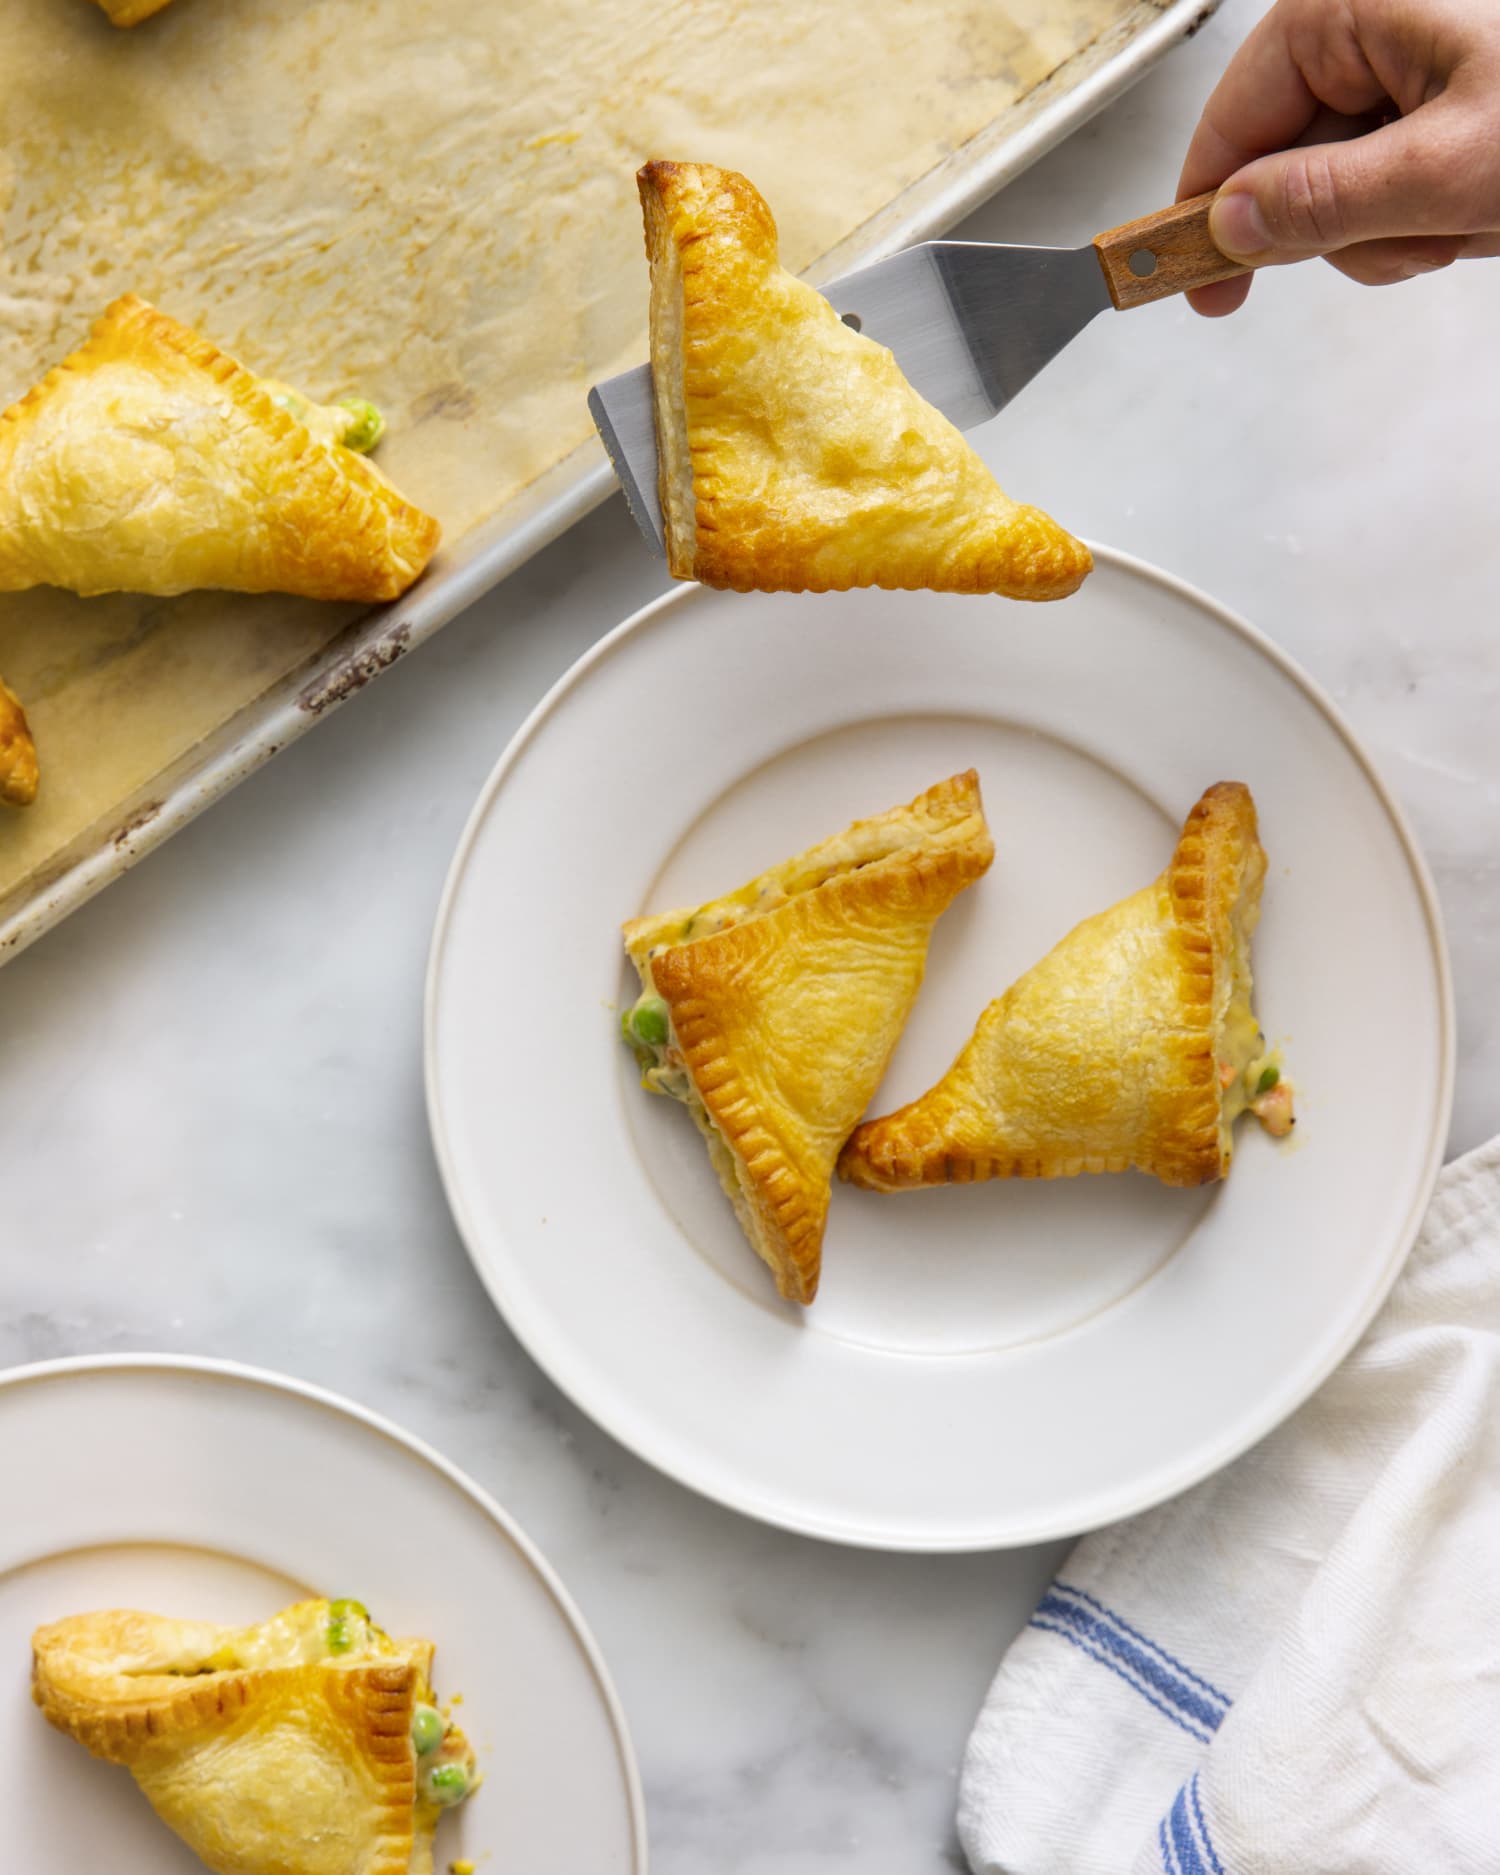 Savory Chicken Pocket Pies Are a Clever Way to Enjoy Your Favorite Comfort Food